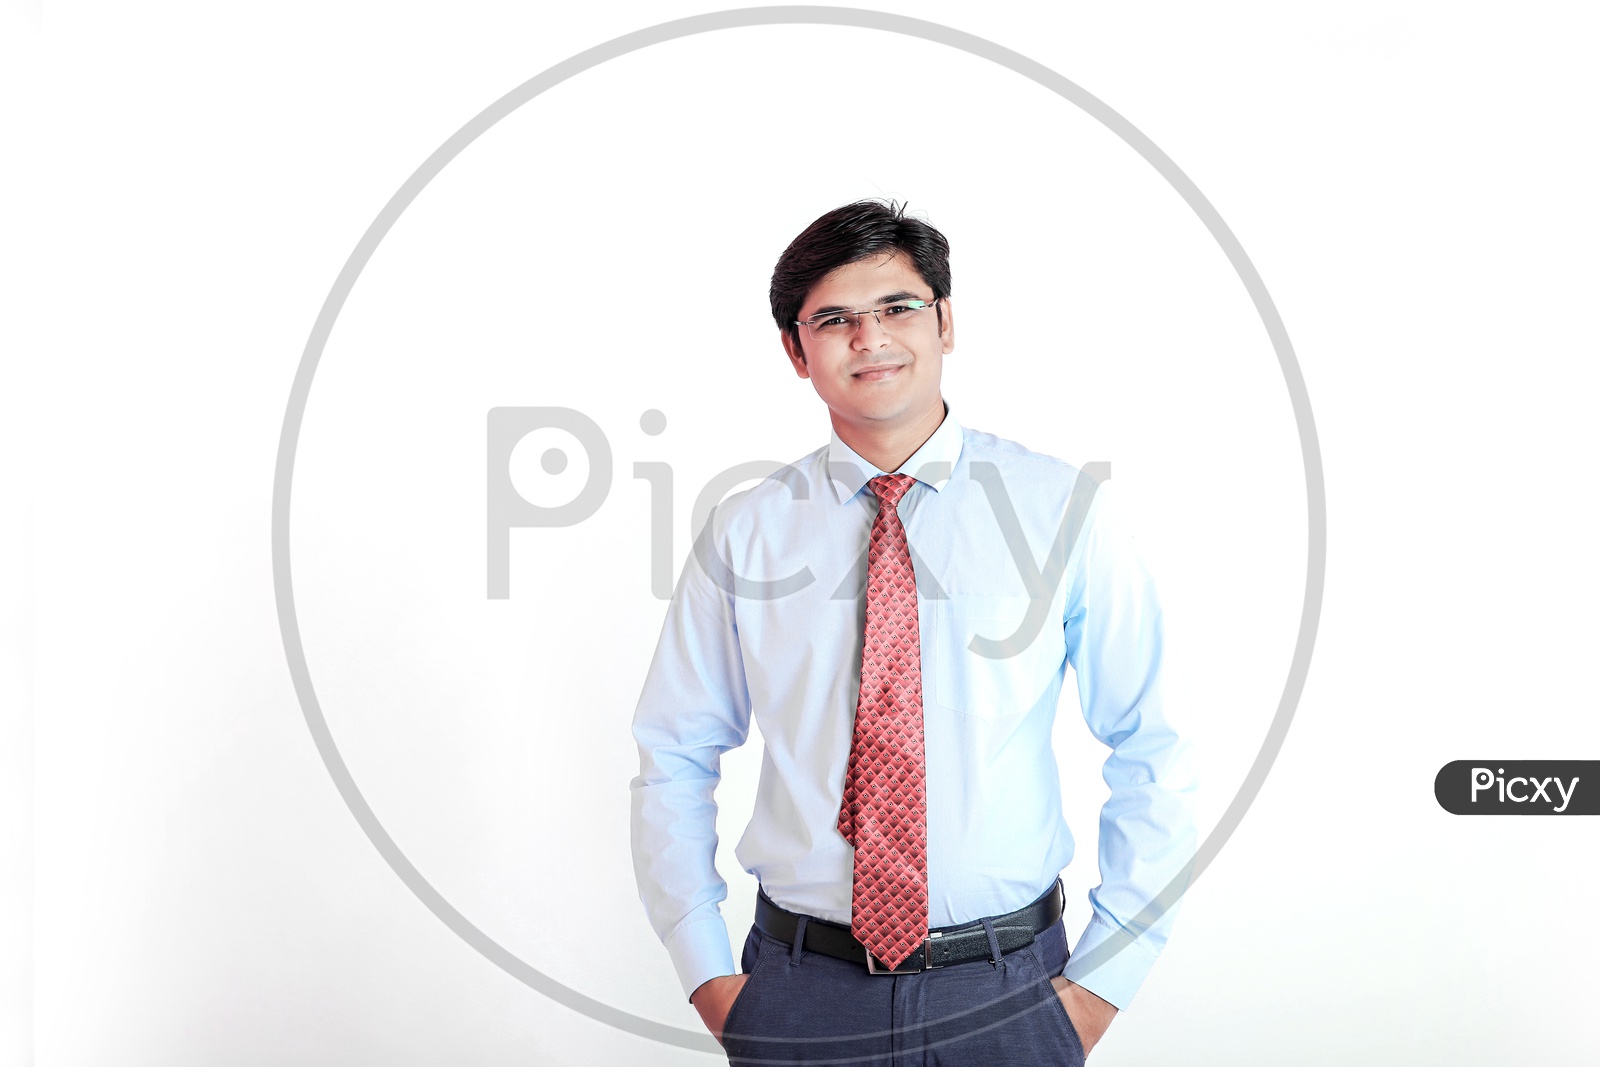 Indian Young Professional Man with a Smiling Face